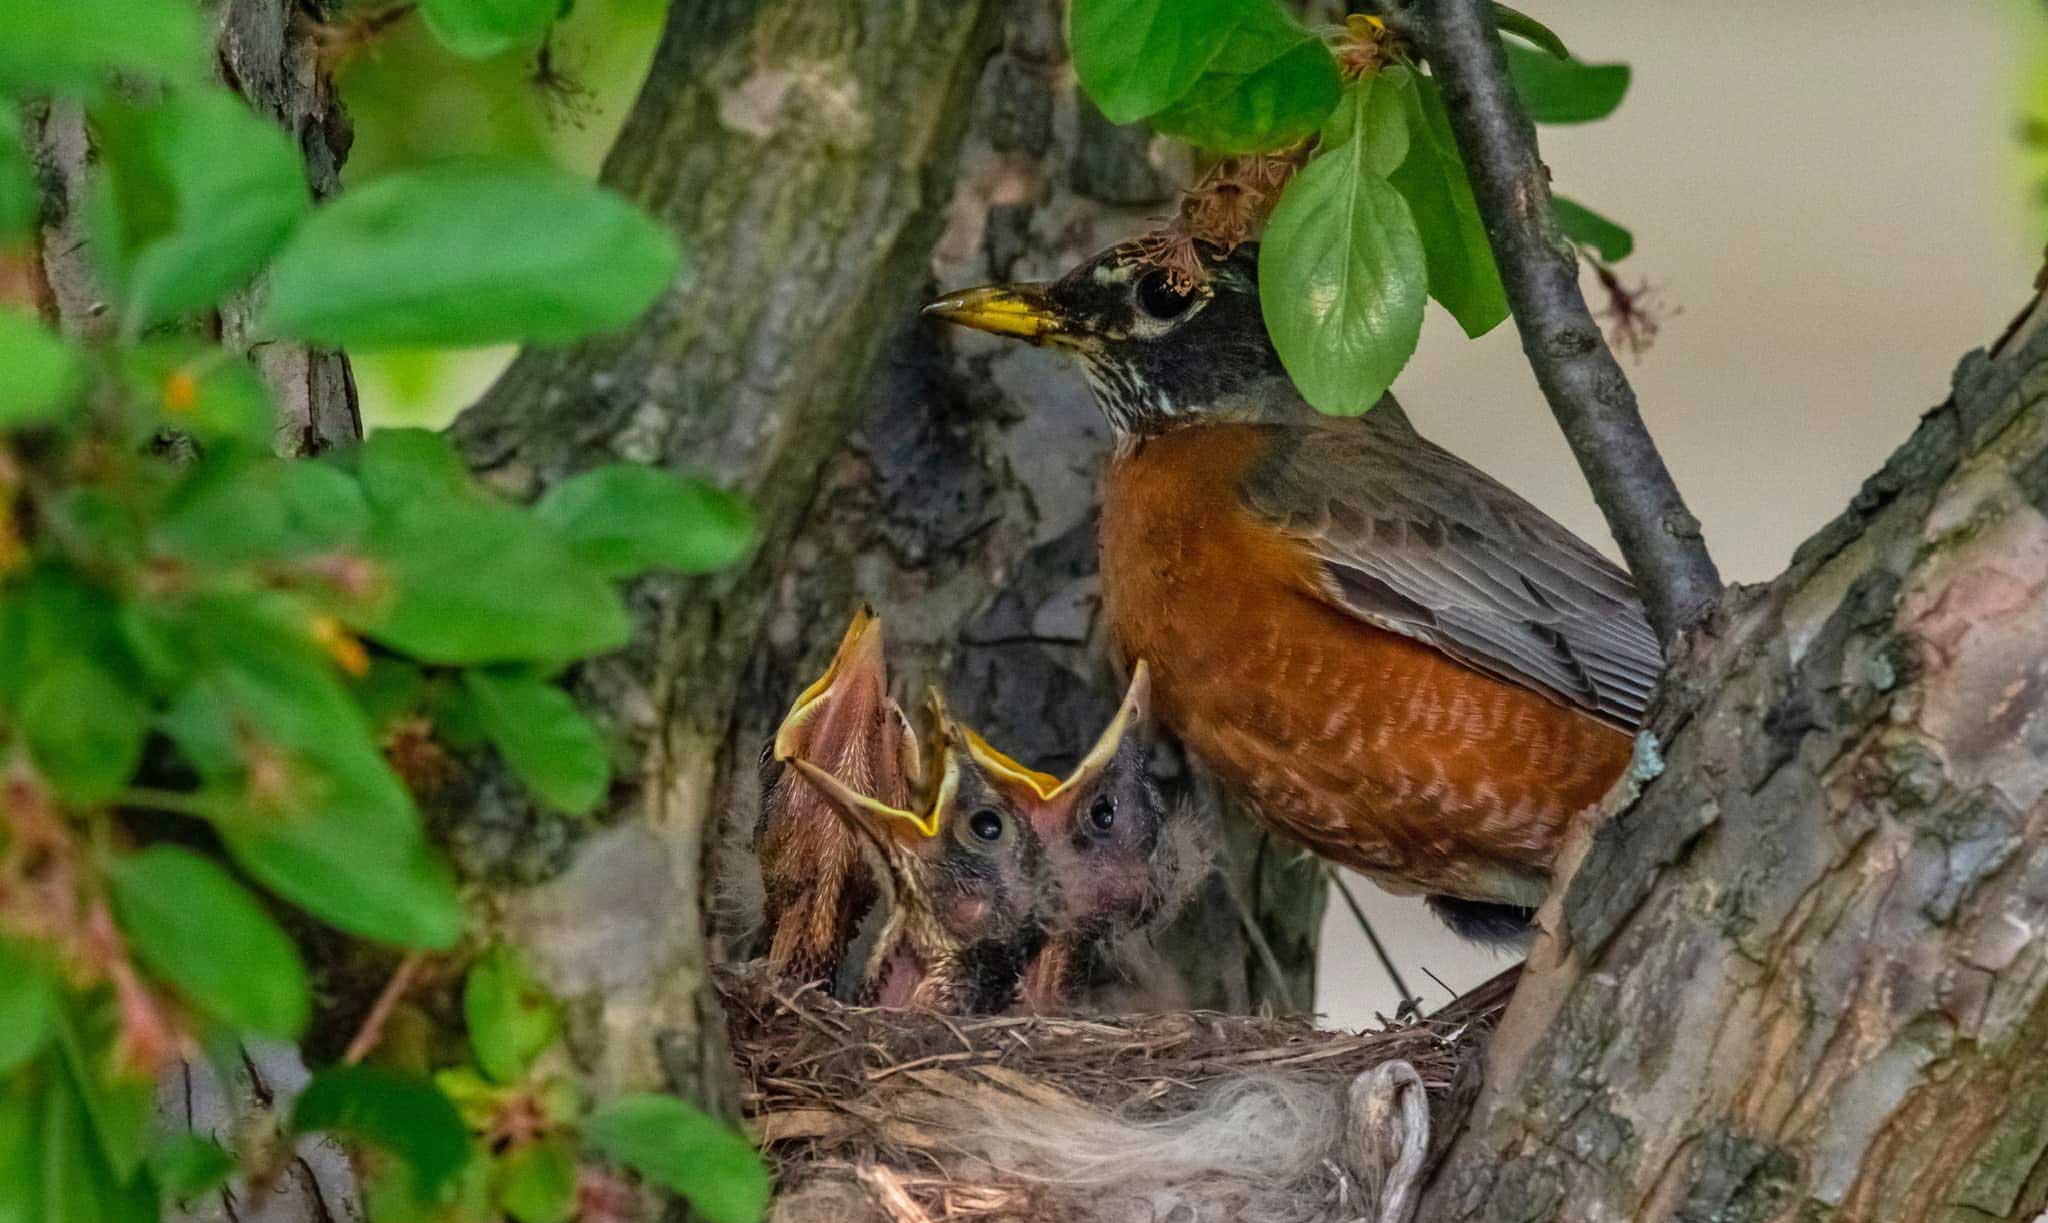 Baby robins sit in a nest while it's mother watches over.